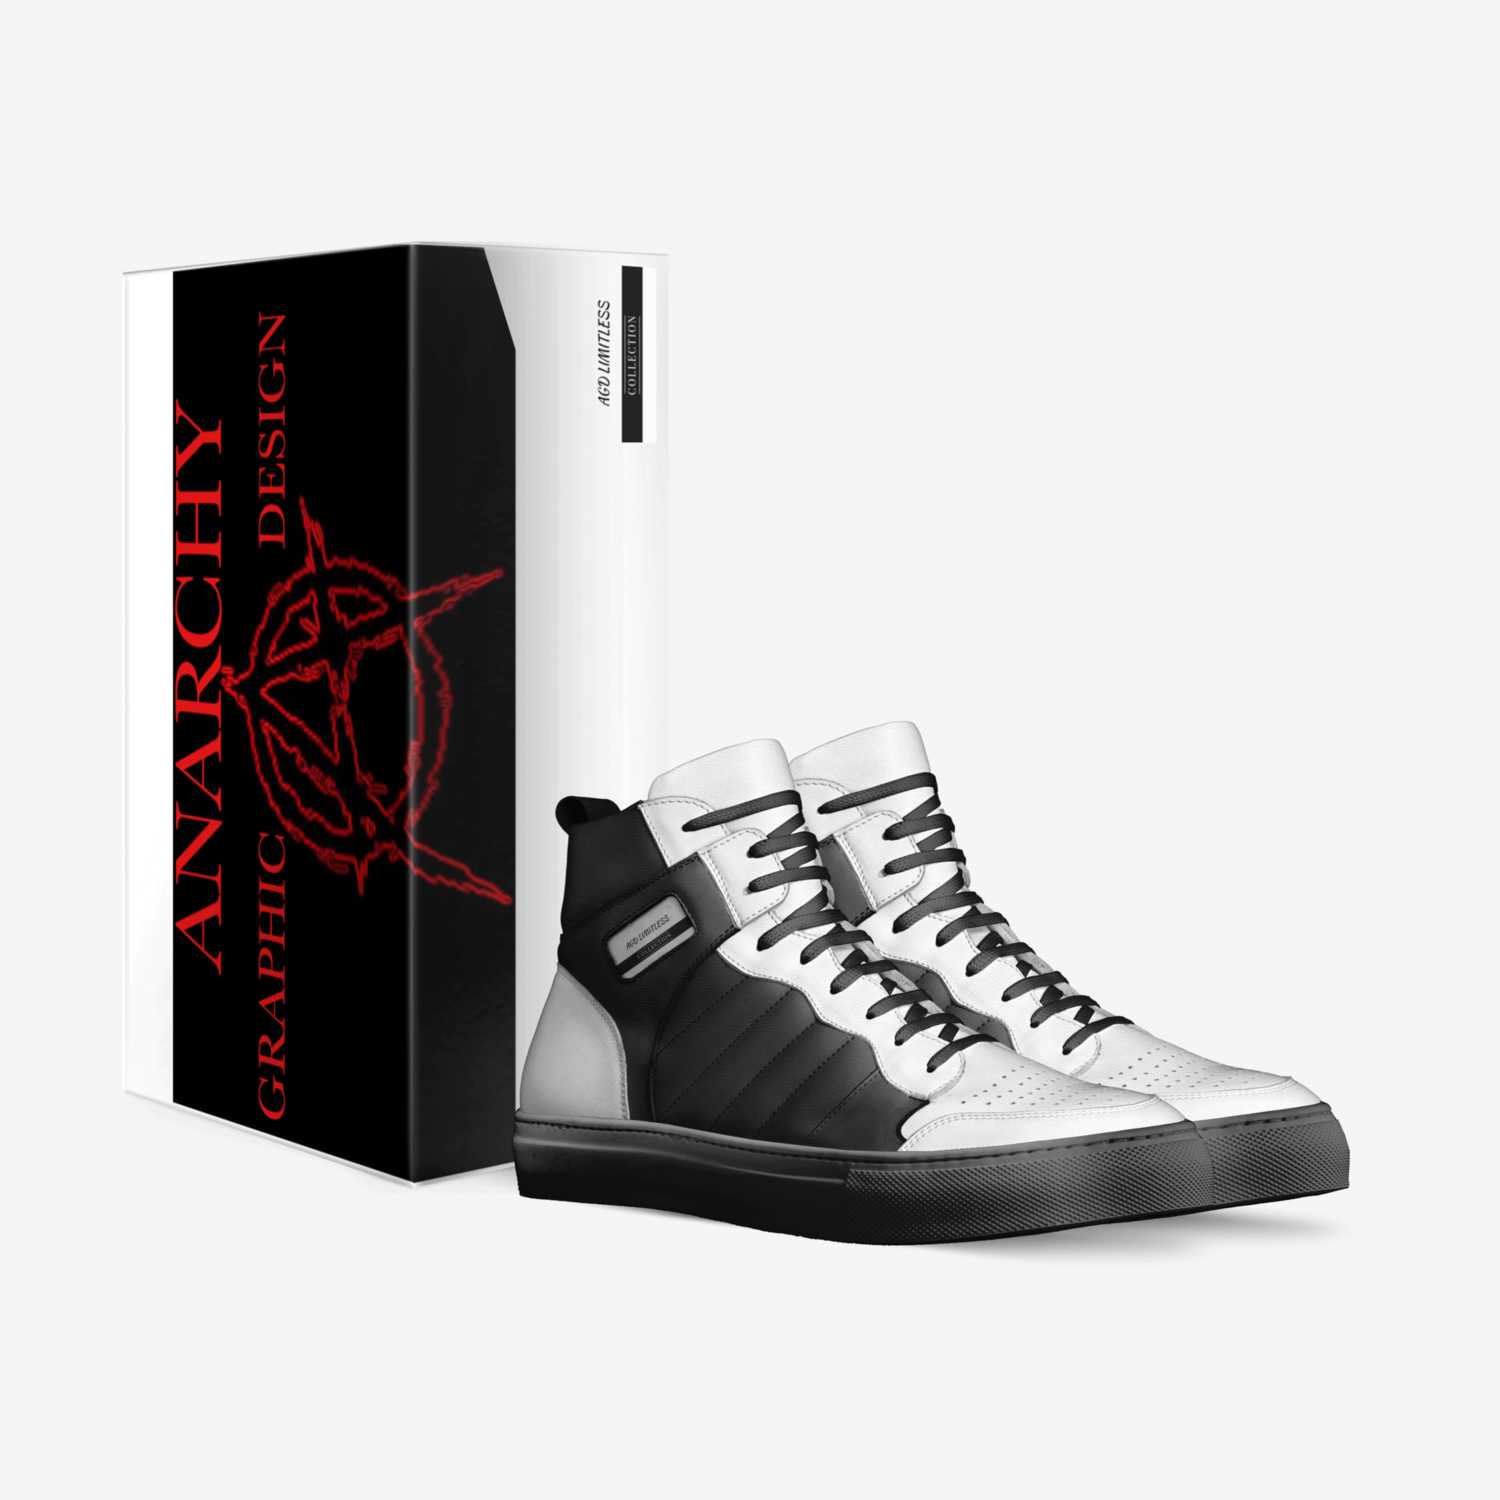 AGD LIMITLESS custom made in Italy shoes by Brendan Lewis | Box view